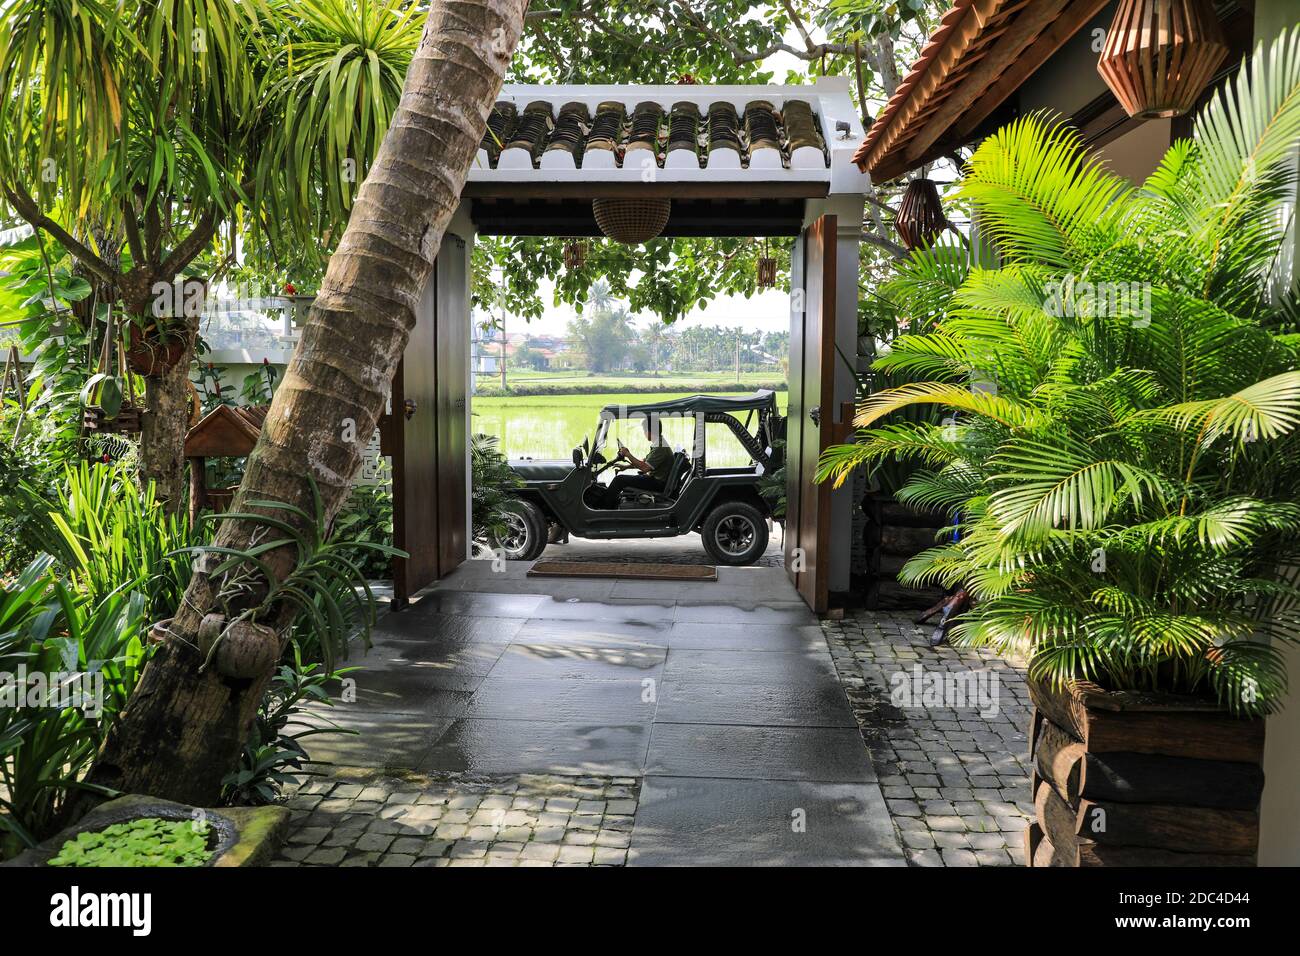 A Jeep used to transport guests waiting at the entrance to the Hoi An Chic green retreat hotel, Hoi An, Vietnam, Asia Stock Photo